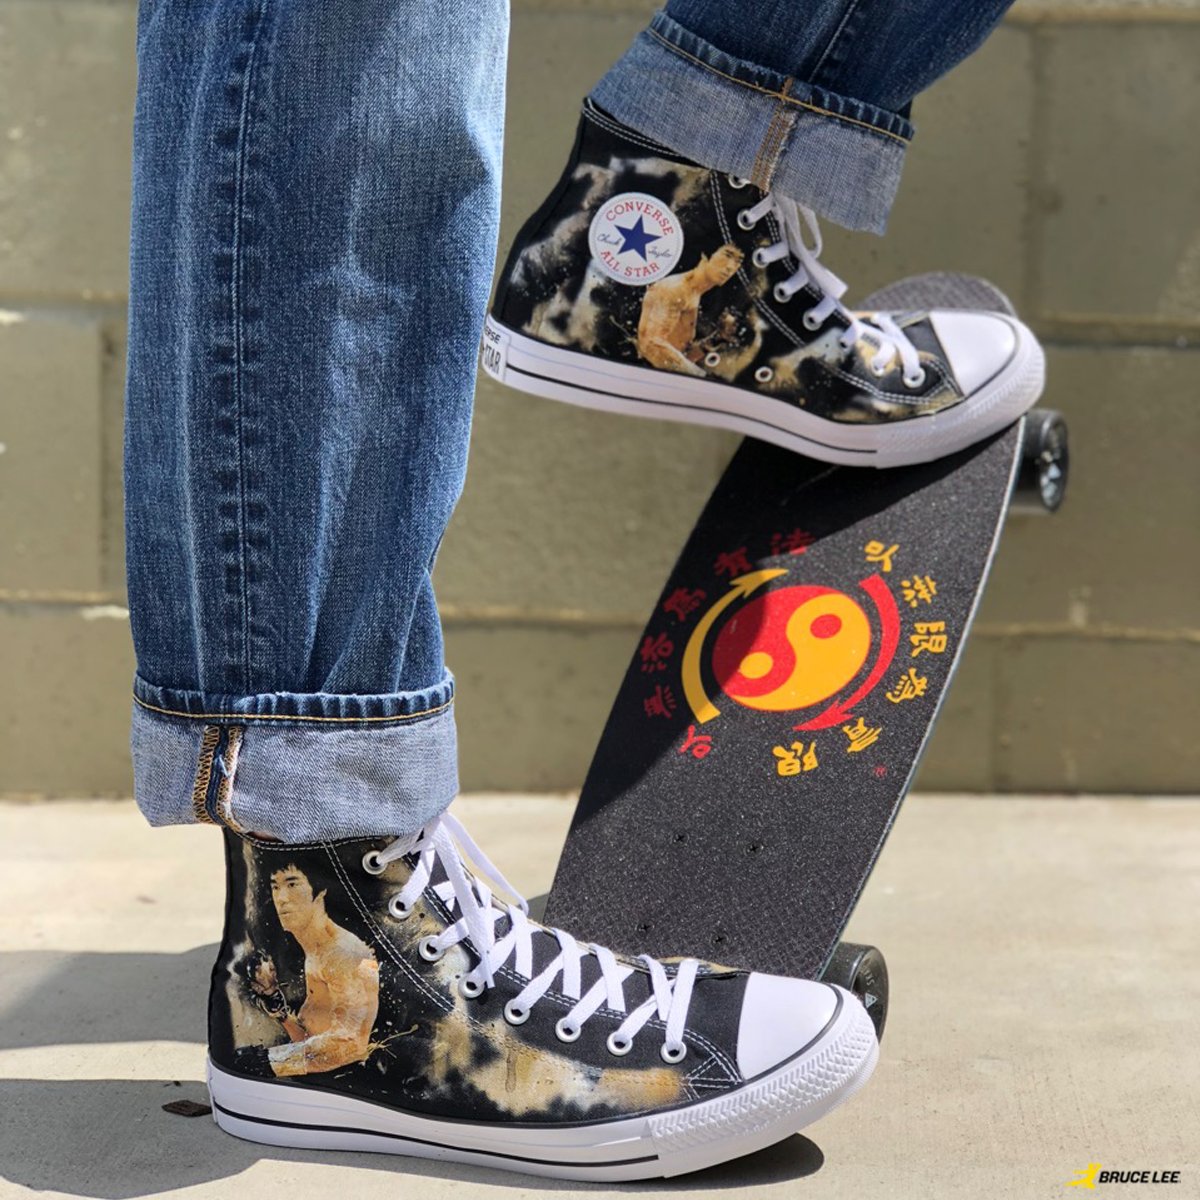 El sendero Pequeño Sicilia Bruce Lee on Twitter: "Dragon Story Converse and Vans Now Available in the  Bruce Lee Family Store --&gt; https://t.co/A19CQrtGLf Have a great weekend!  https://t.co/DZzs5dy0f5" / Twitter